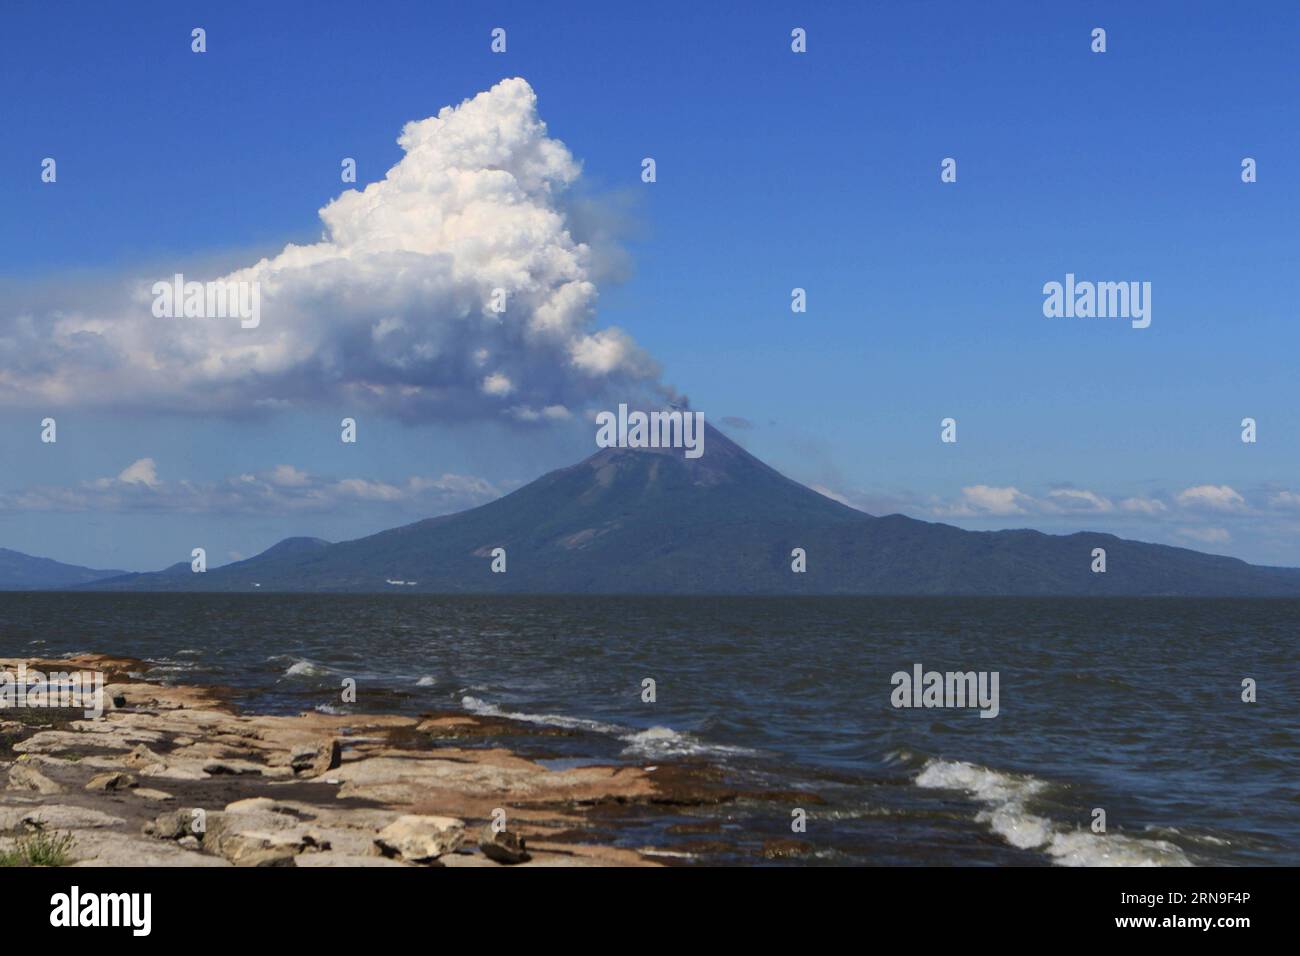 Nicaragua: Vulkan Momotombo ausgebrochen (151203) -- LEON, Dec. 2, 2015 -- Momotombo Volcano spews large clouds of gas and ash in La Paz Centro municipality, Leon department, western Nicaragua, on Dec. 2, 2015. Momotombo Volcano, located in the north of the Xolotlan Lake, western Nicaragua, continued its eruptive activity in the last hours, with incandescent material observed on its crater, according to the Municipal Committees of Disaster Prevention. ) NICARAGUA-LEON-ENVIRONMENT-VOLCANO JOHNxBUSTOS PUBLICATIONxNOTxINxCHN   Nicaragua Volcano Momotombo erupted 151203 Leon DEC 2 2015 Momotombo V Stock Photo